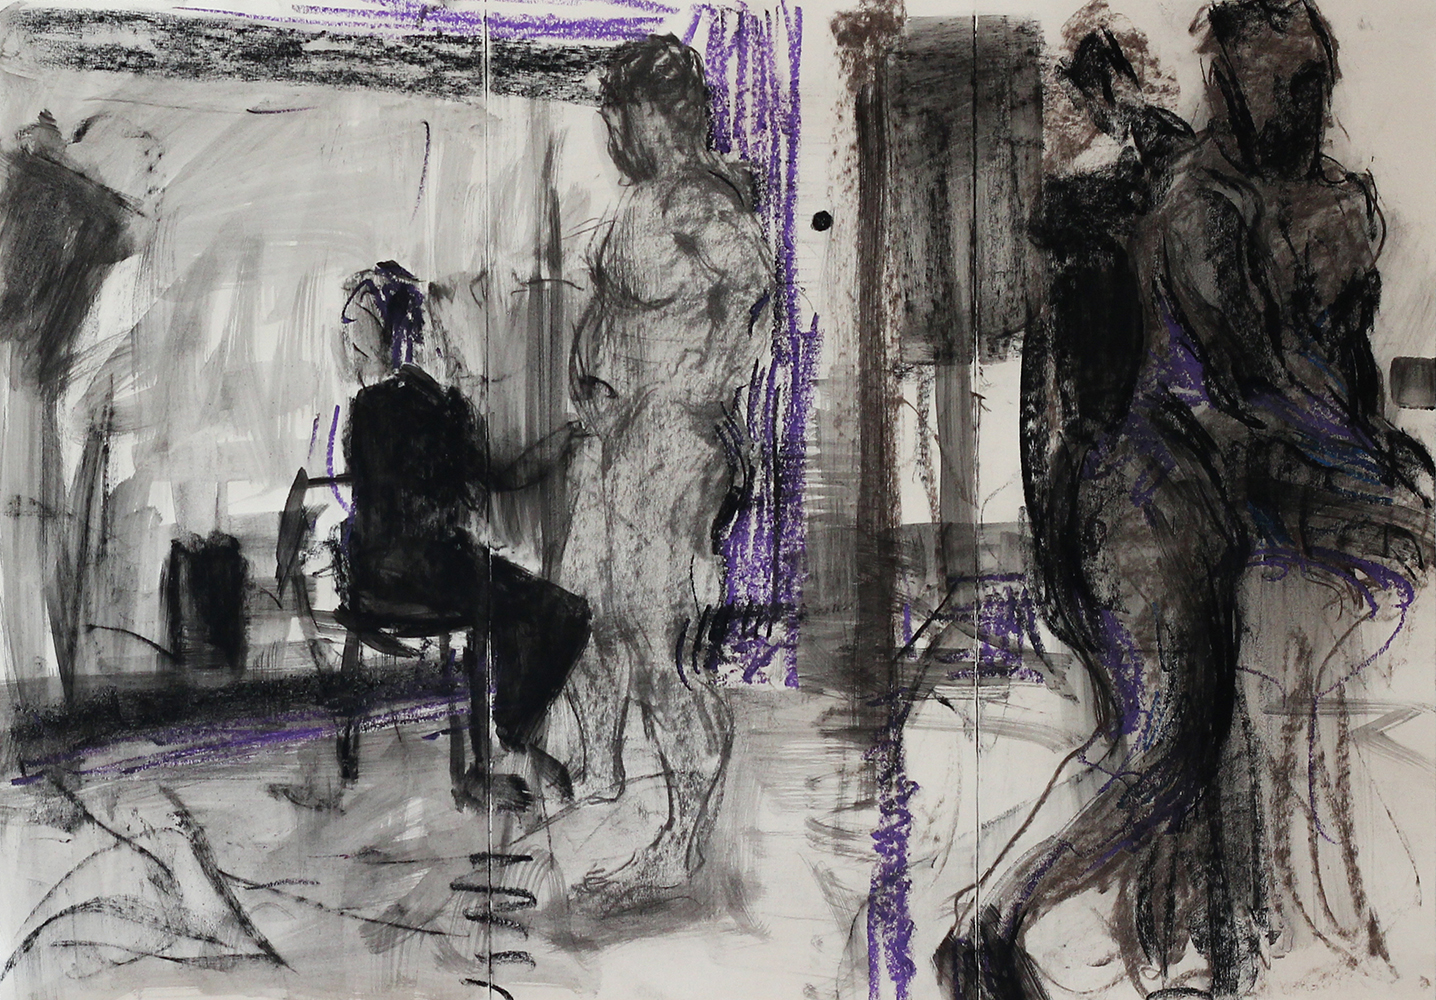 Model 3_60cm x 42cm_Charcoal and Pastel on Paper